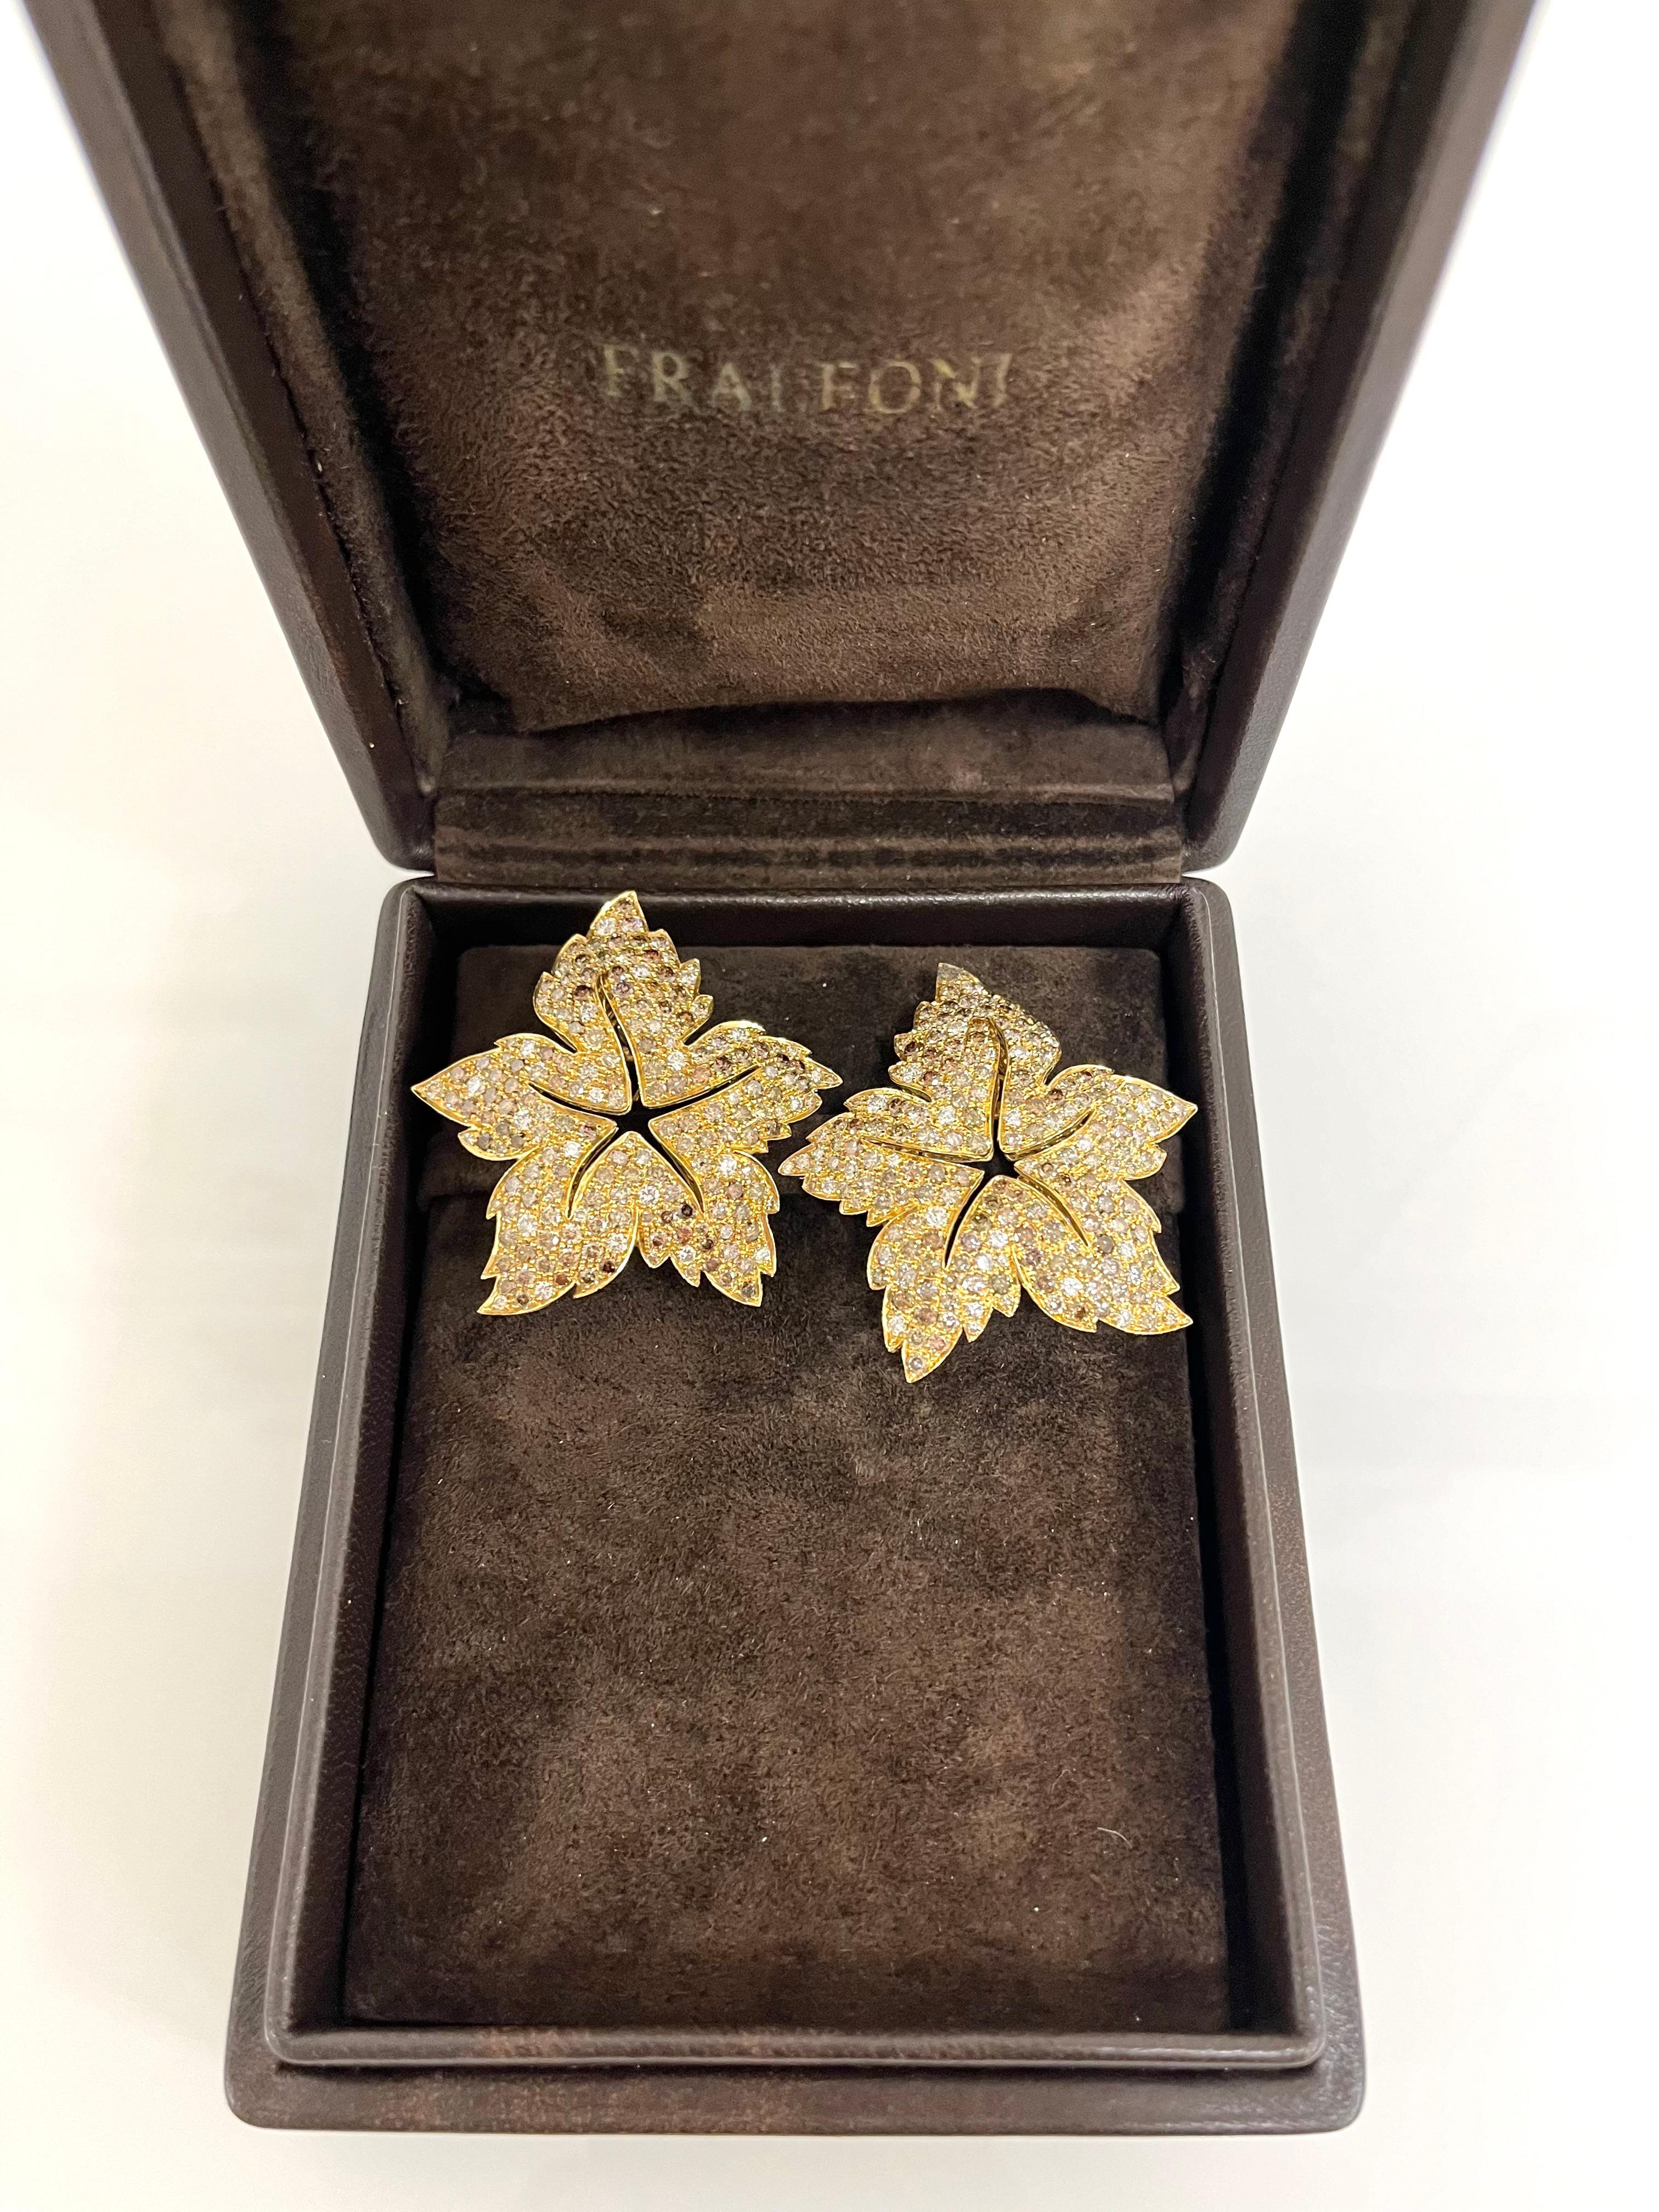 Women's Fraleoni 18 Kt. Yellow Gold Multicolored Daimonds Leaf  Earrings For Sale